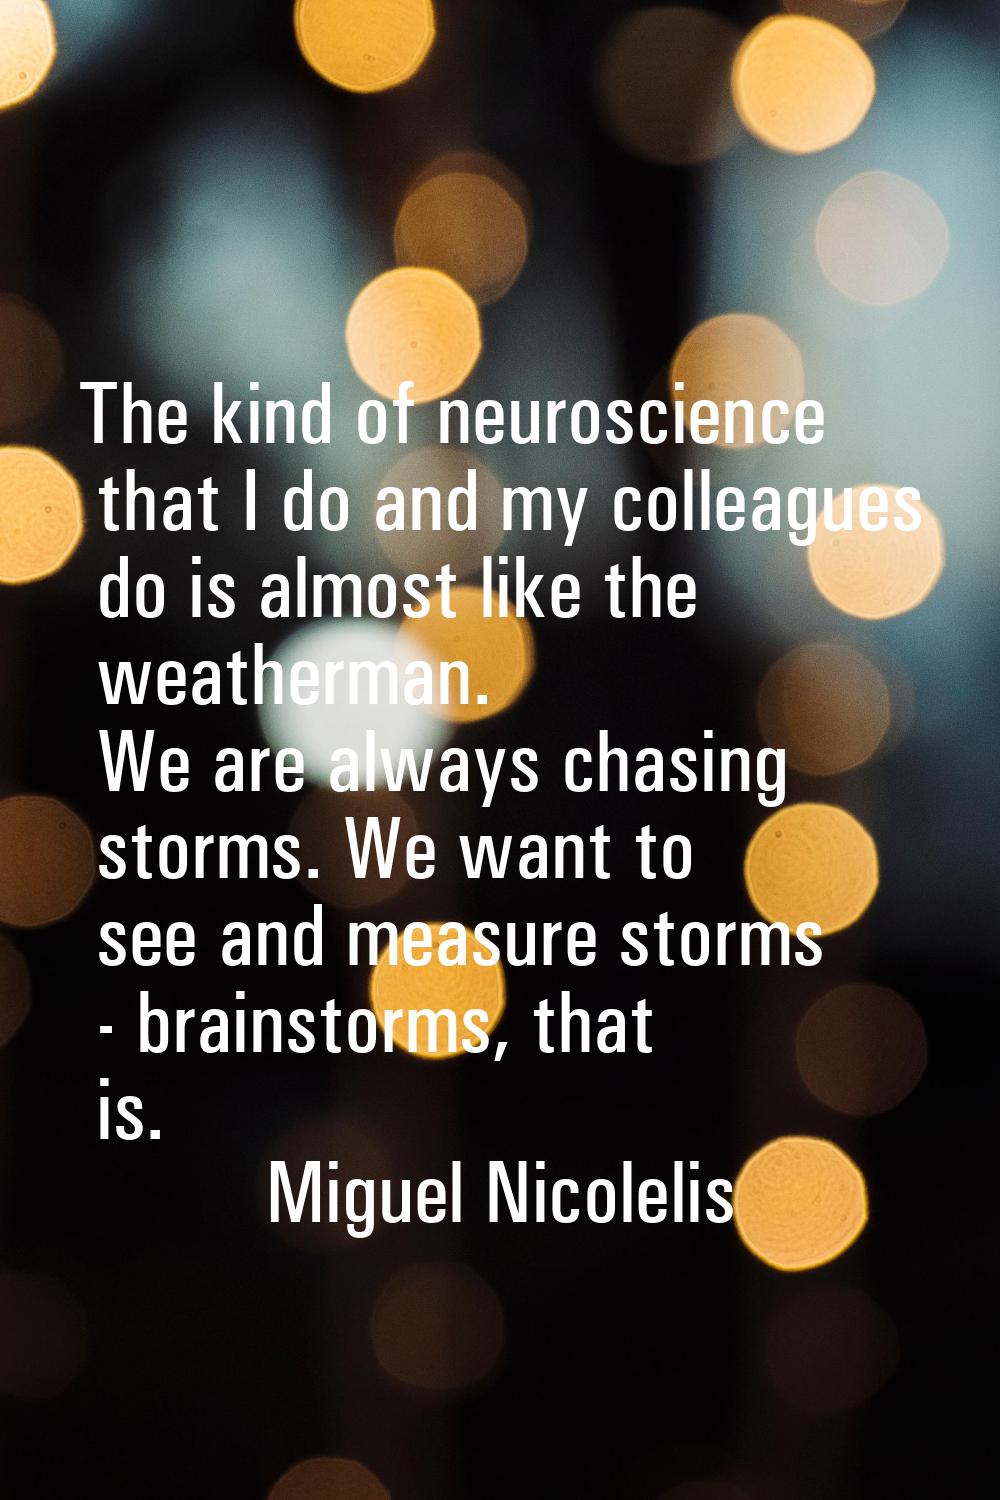 The kind of neuroscience that I do and my colleagues do is almost like the weatherman. We are alway